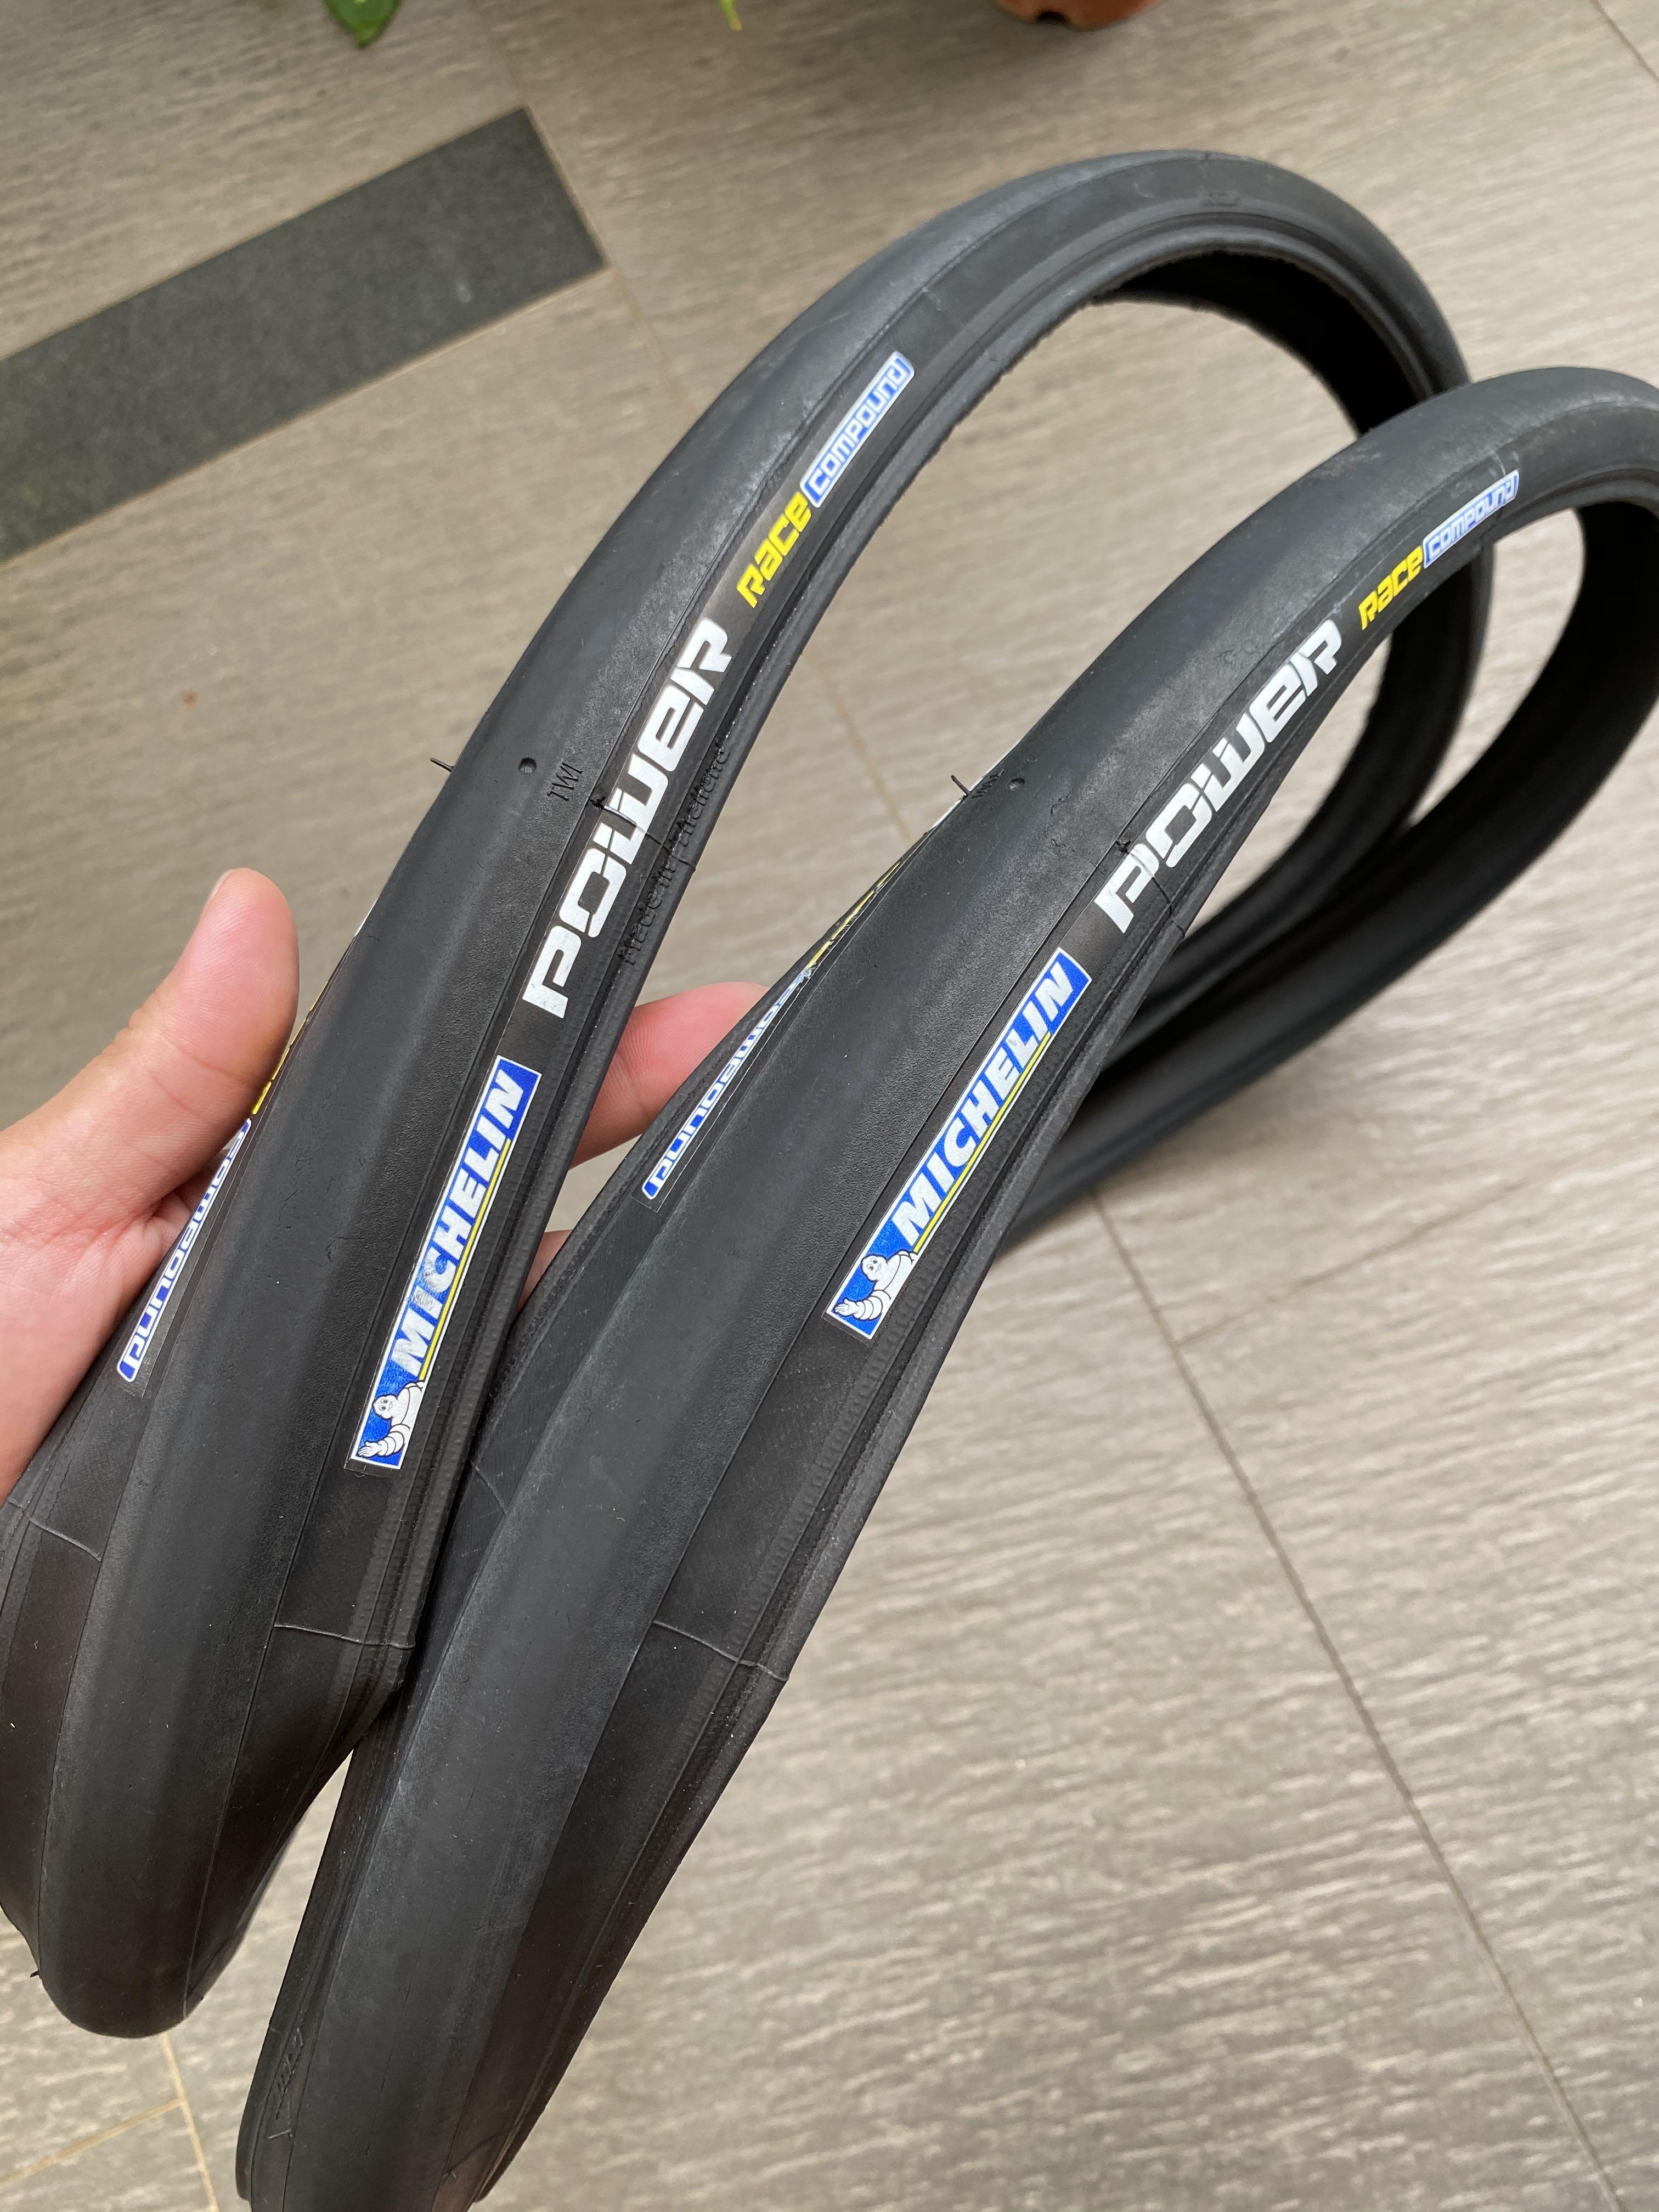 clincher tyres